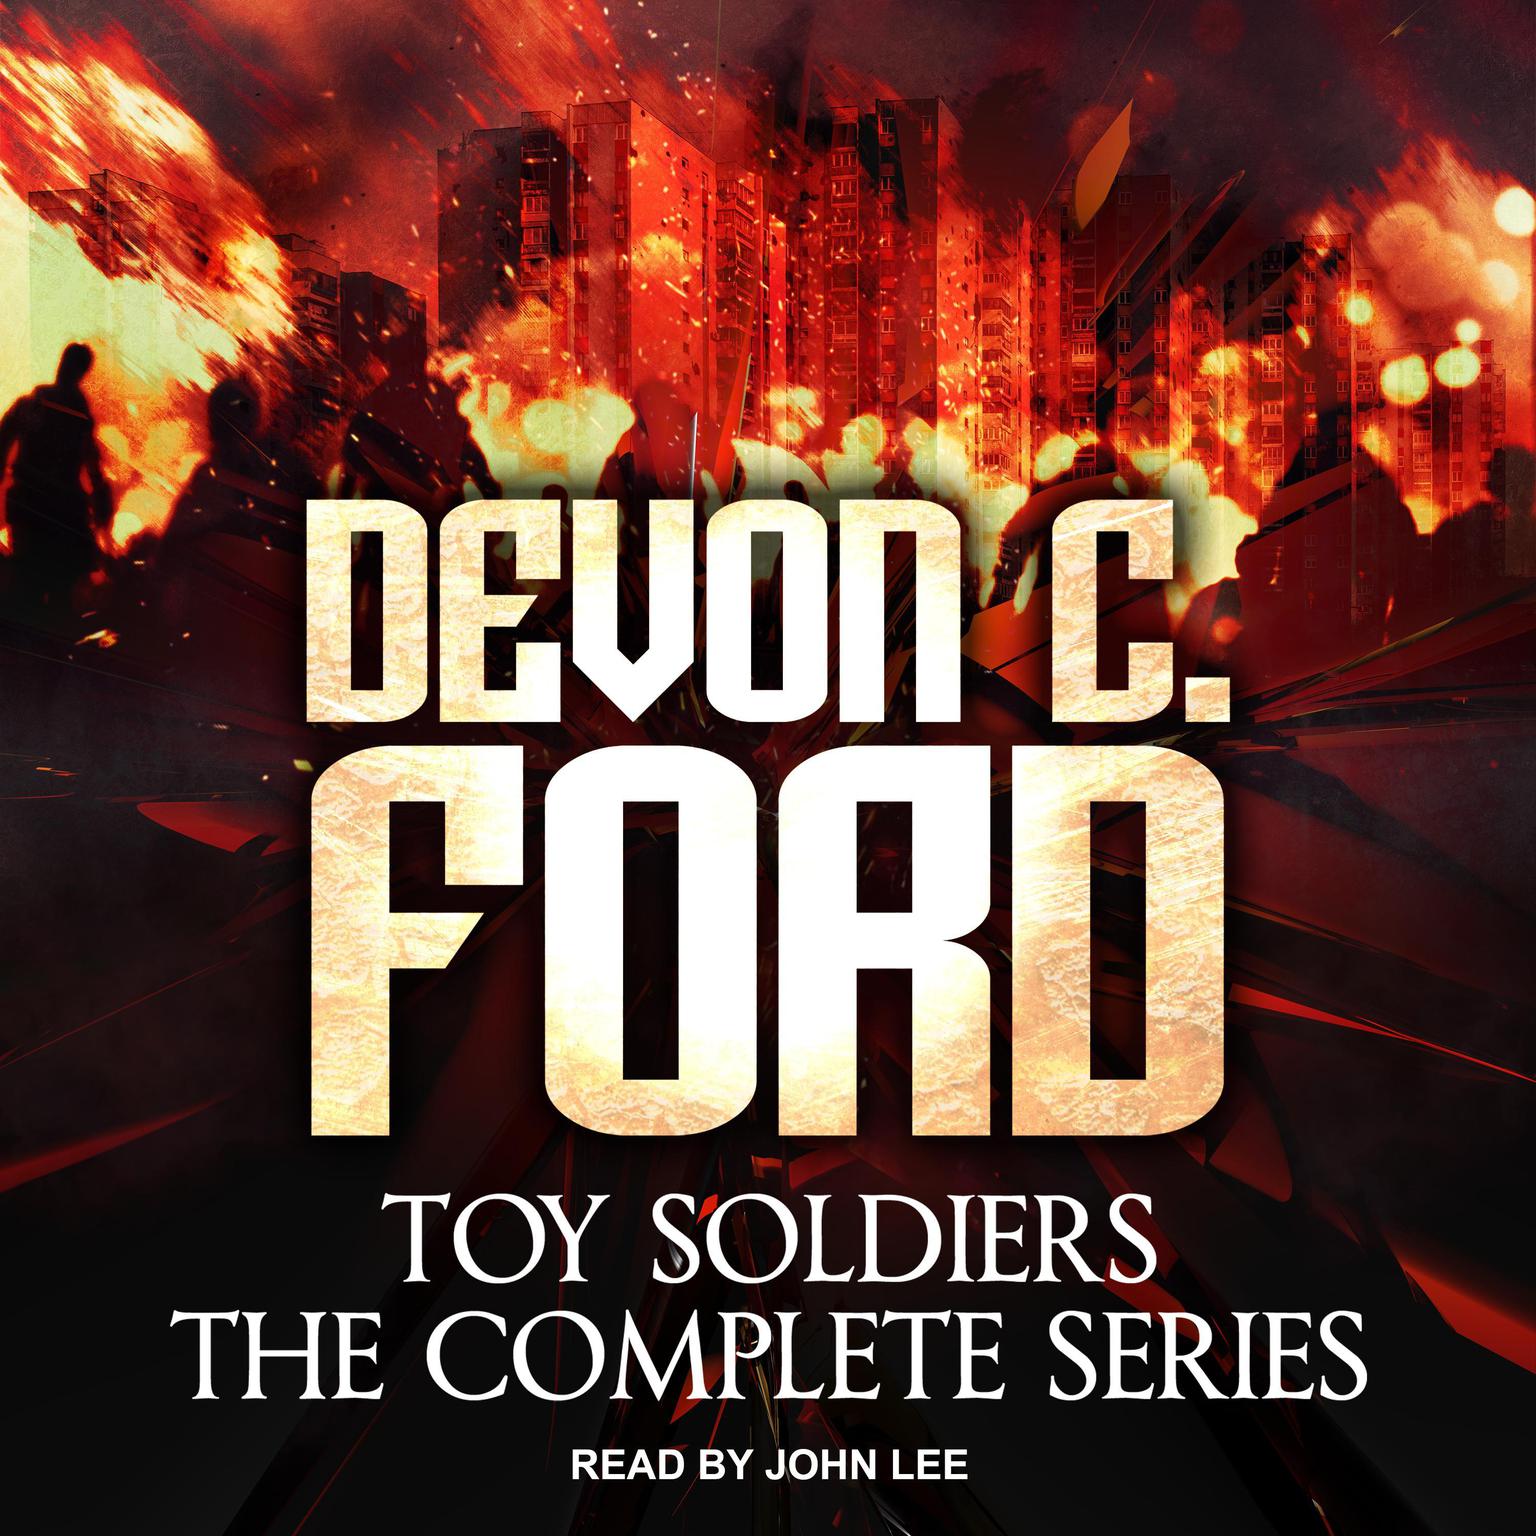 Toy Soldiers: Books 1-6 Box Set Audiobook, by Devon C. Ford